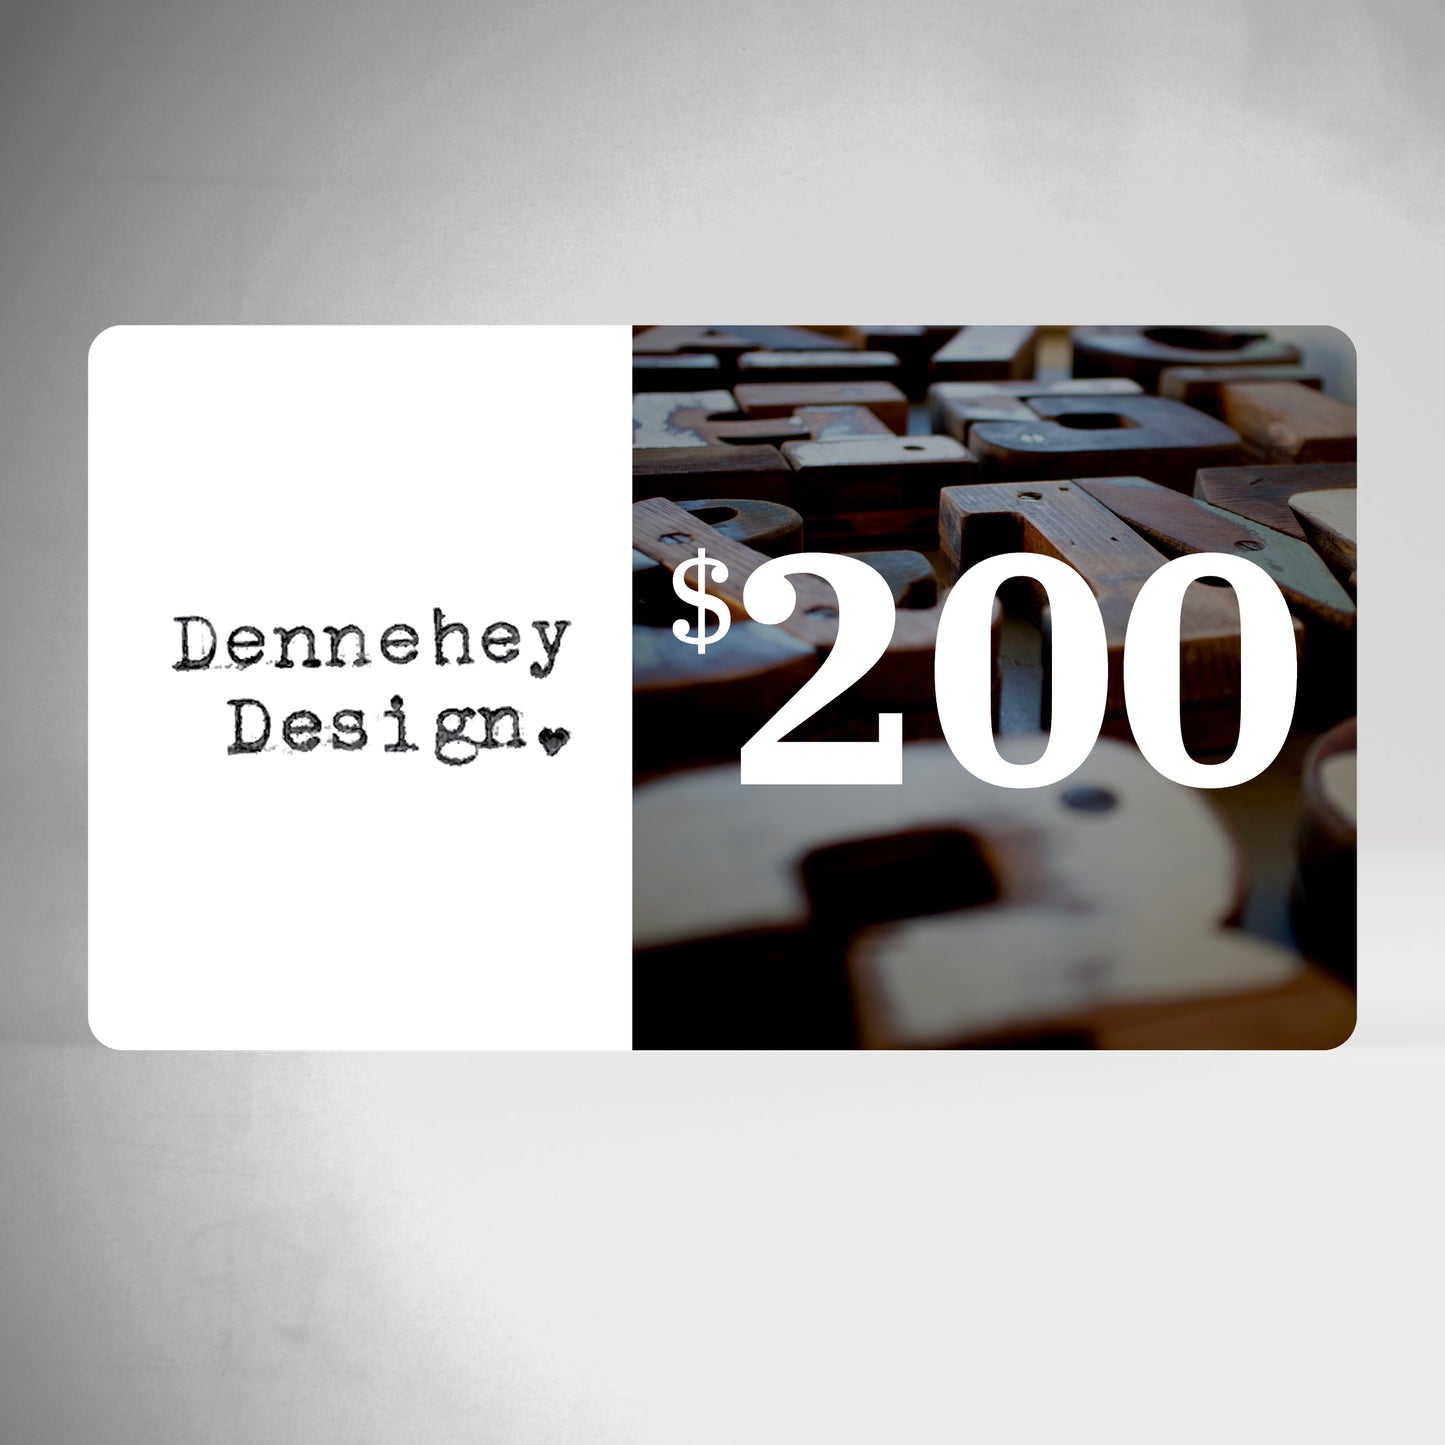 Load image into Gallery viewer, Dennehey Design Gift Cards
